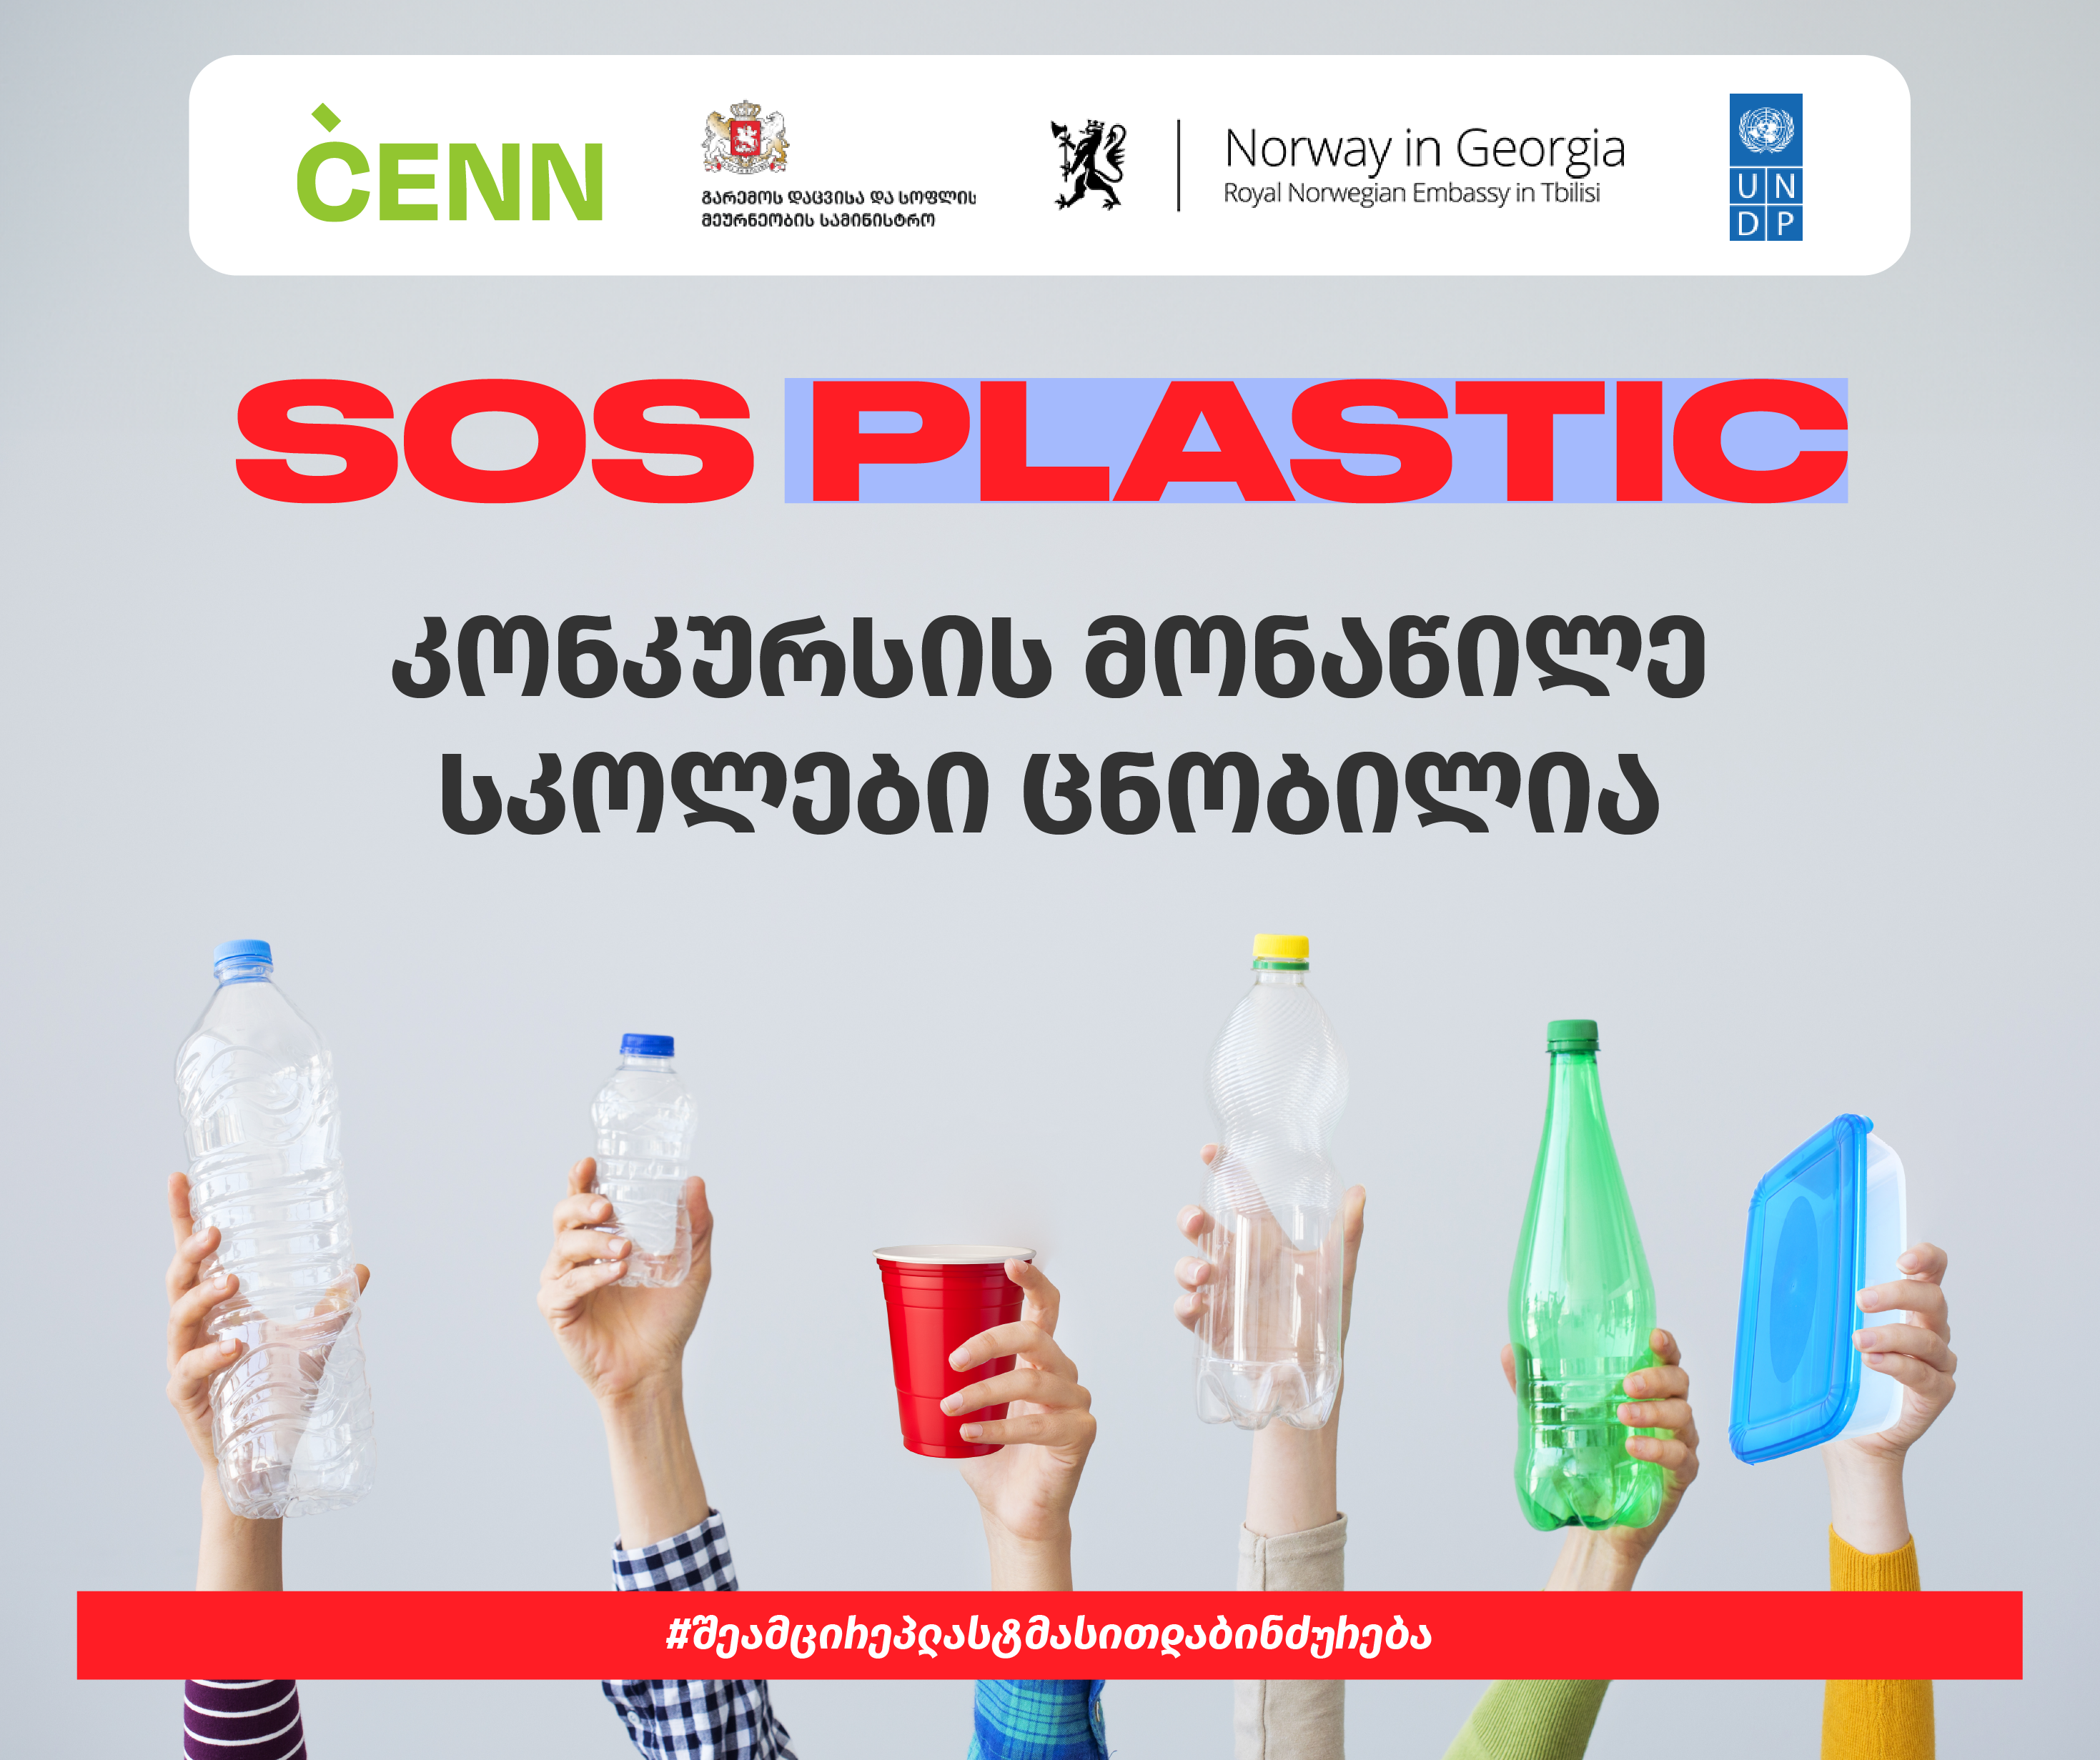 The participating 20 schools for the SOS Plastic competition are confirmed